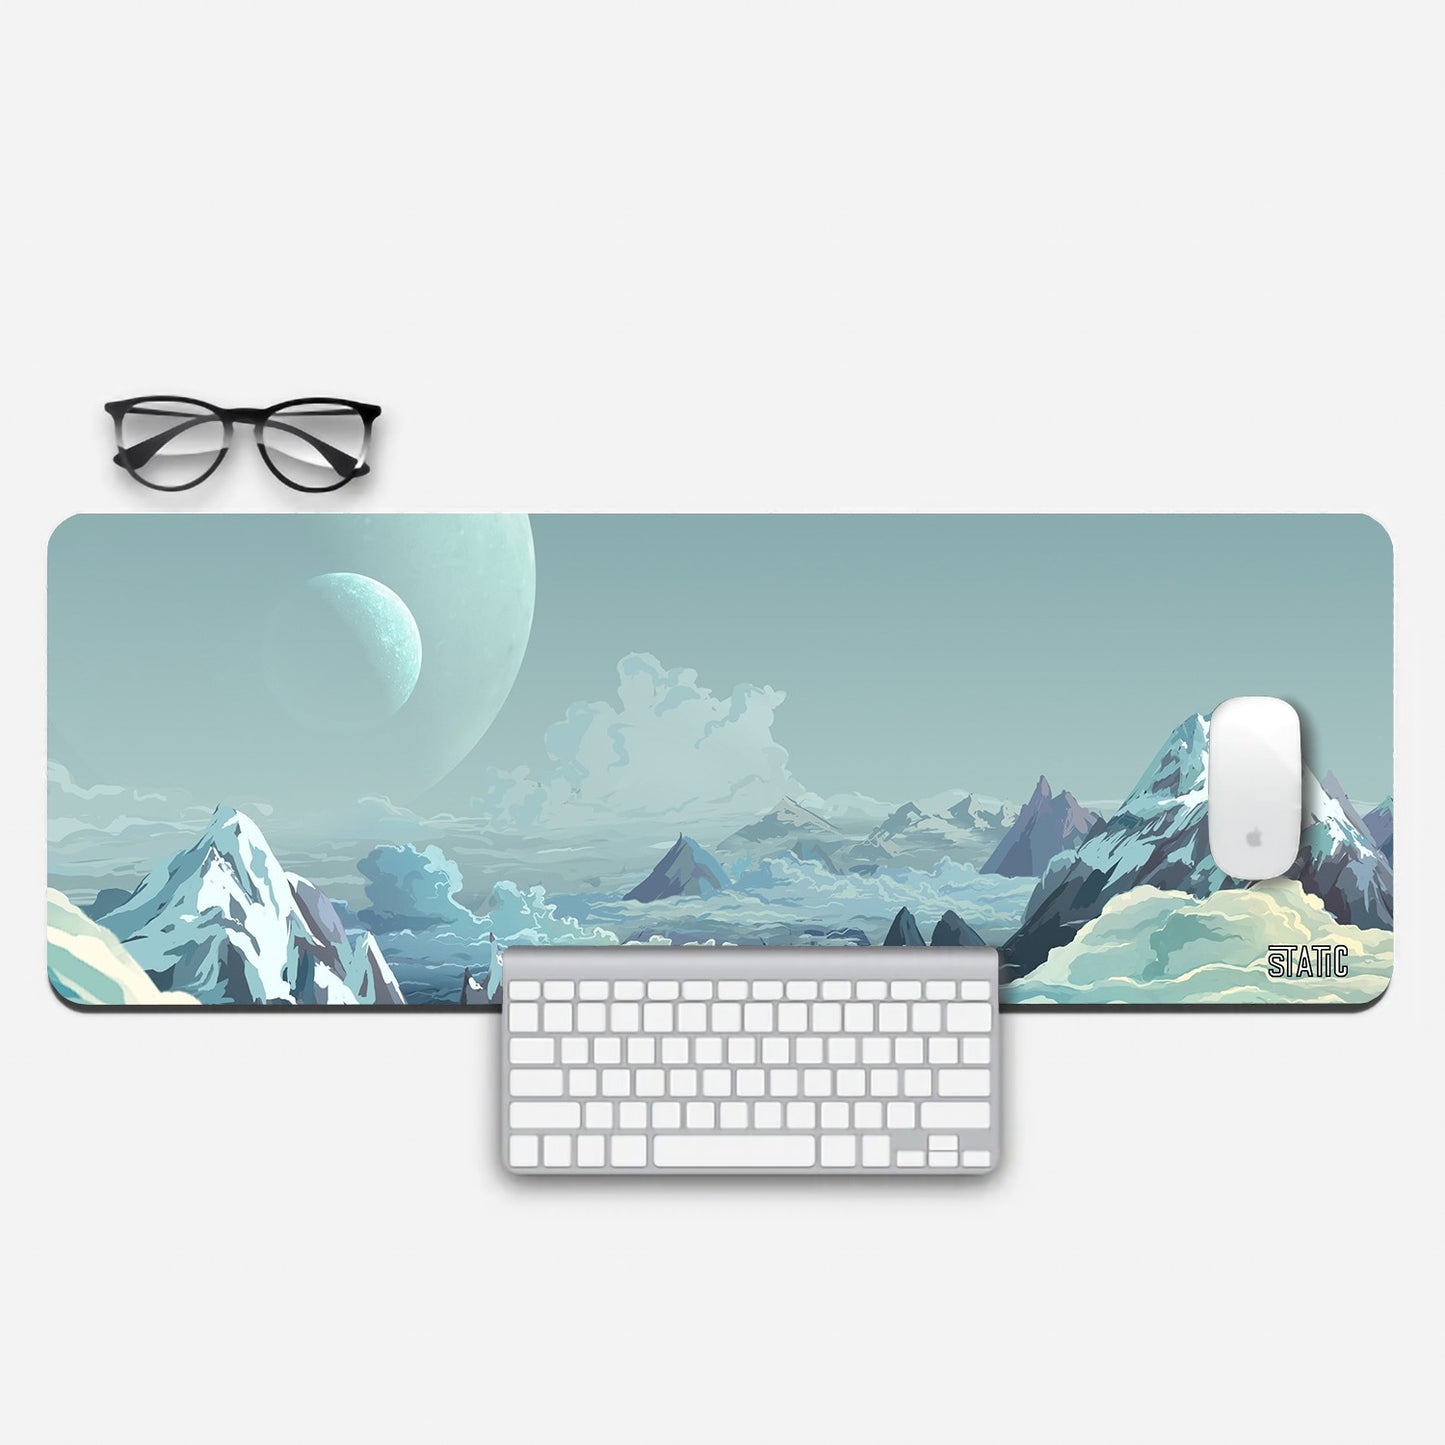 Elevate your gaming experience with our premium 800x300mm gaming pad. It's 3mm thick, providing a comfortable and supportive surface. Designed for gamers, it features skid-proof properties and a solid back grip for precise control. The stunning digital image of snow-clad mountains, taken from a summit, creates an immersive atmosphere. Printed with high-quality sublimation EPSON inks, this pad offers a fade-proof guarantee. Bring the mountains to your gaming setup – order now for a unique gaming adventure!